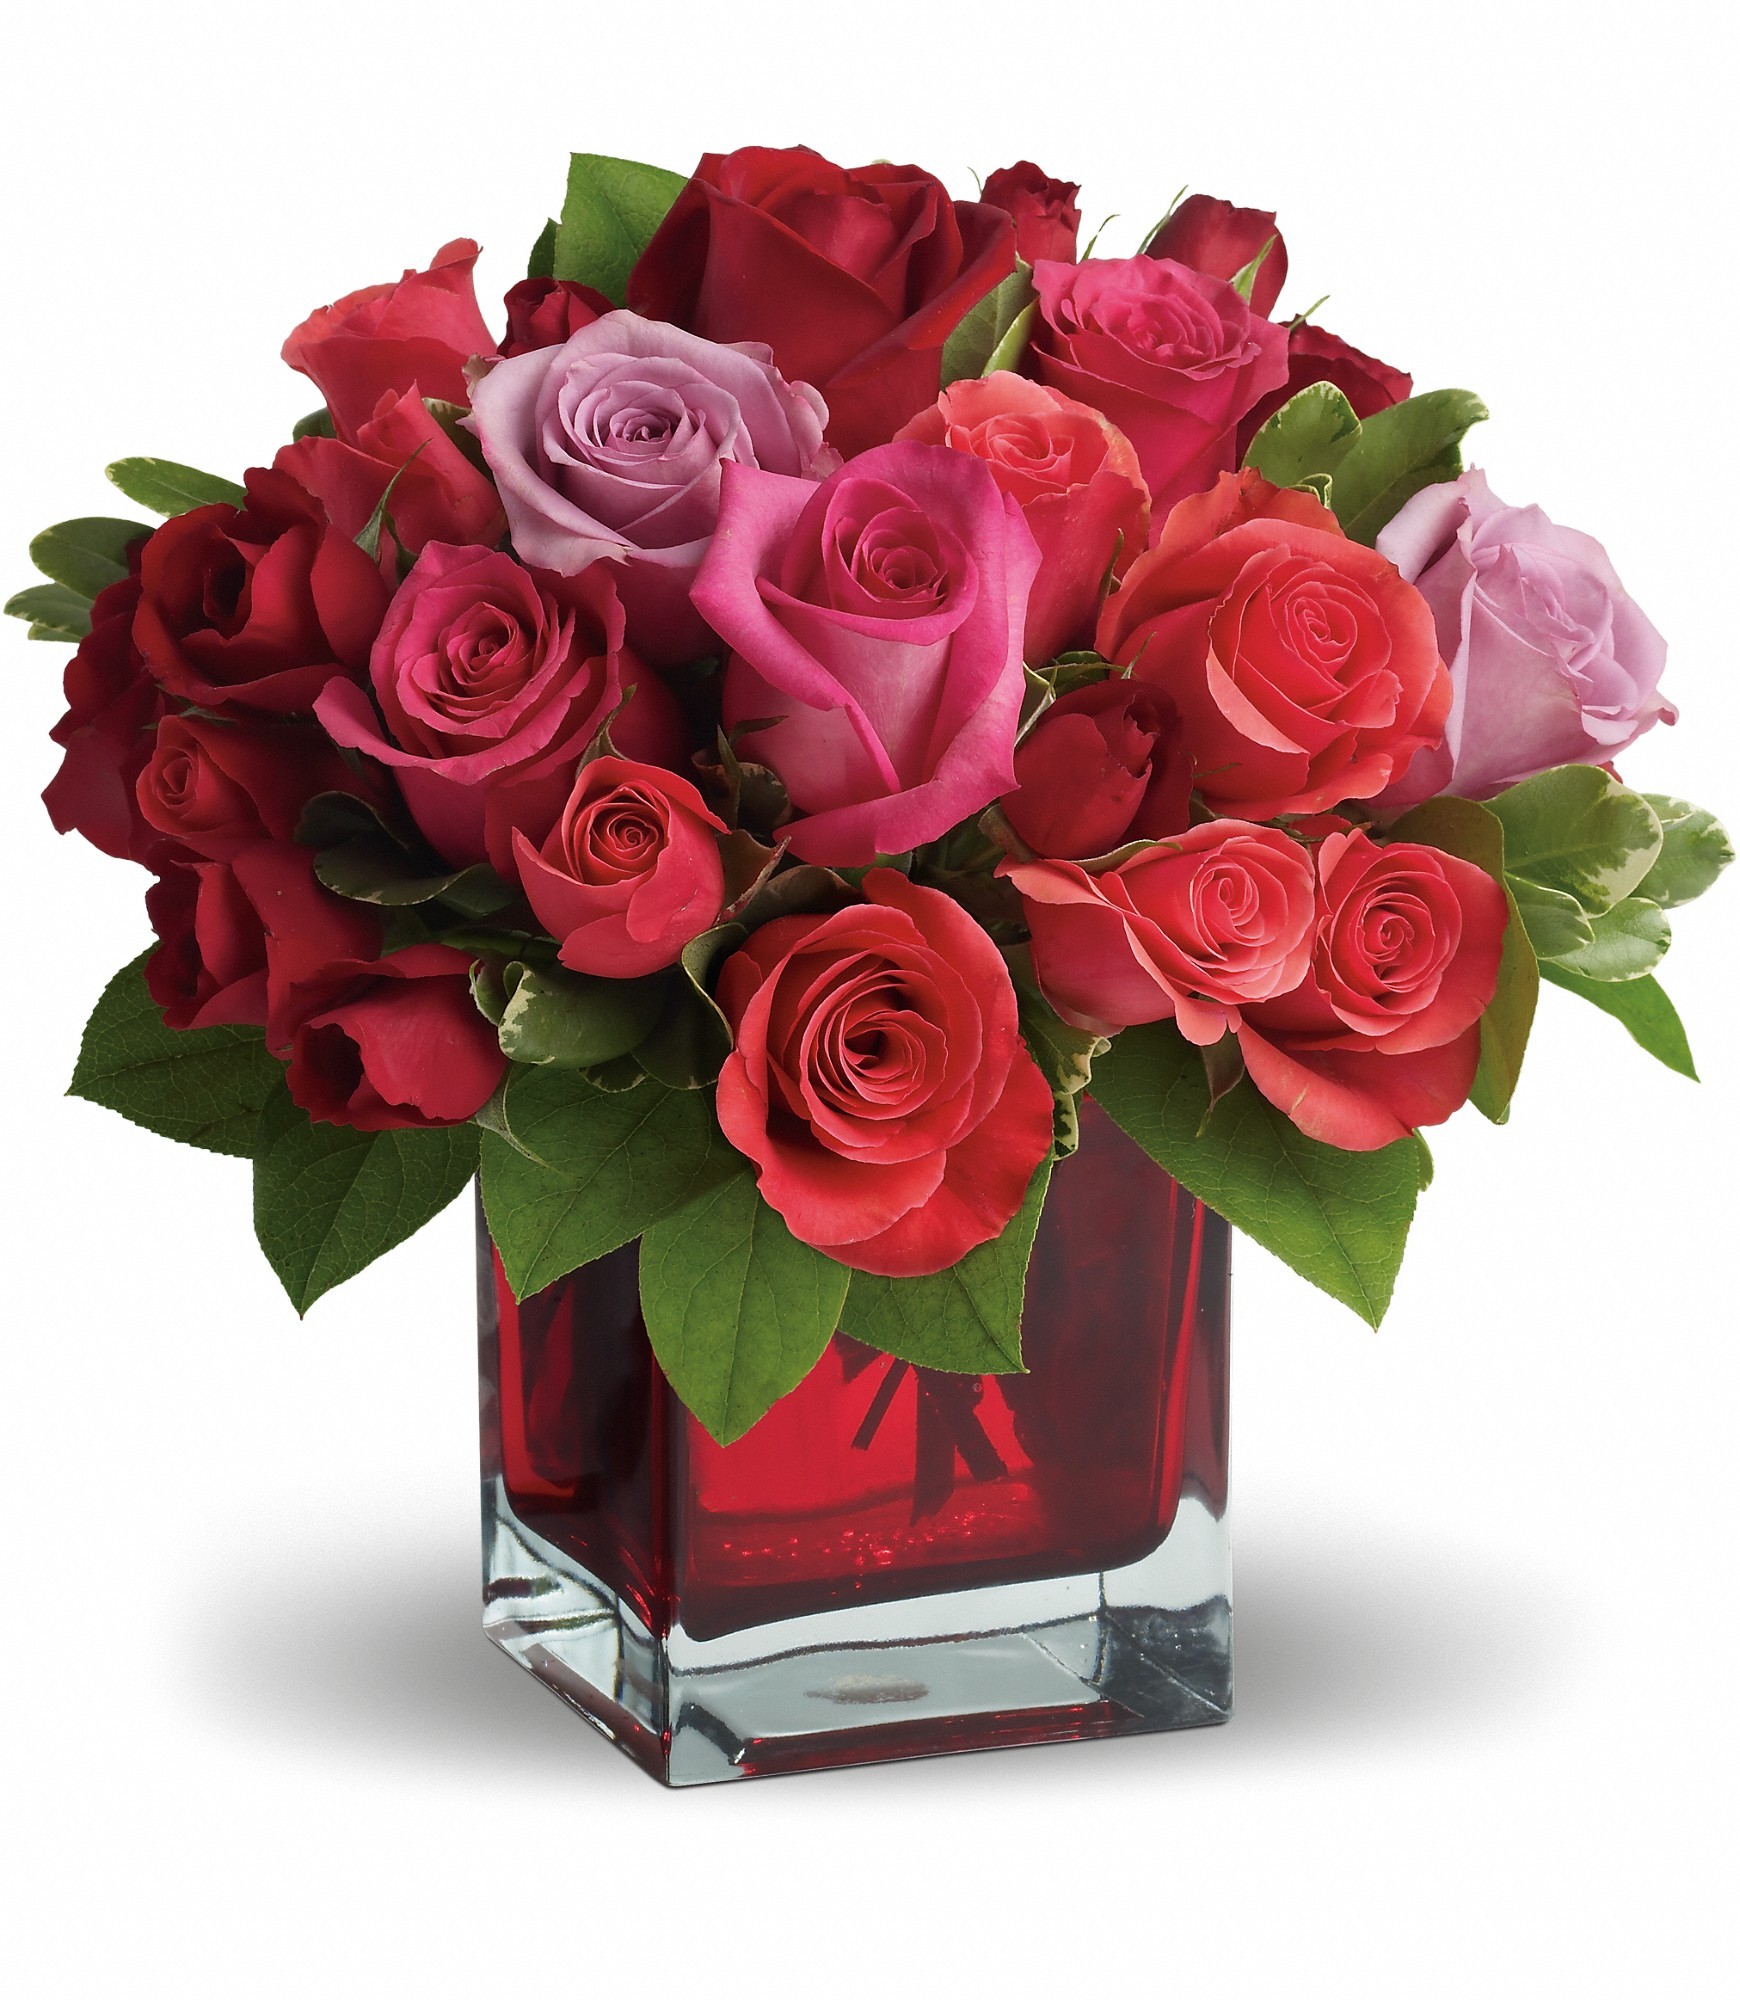 Madly in Love Bouquet with Red Roses by Teleflora in Minot, ND ...